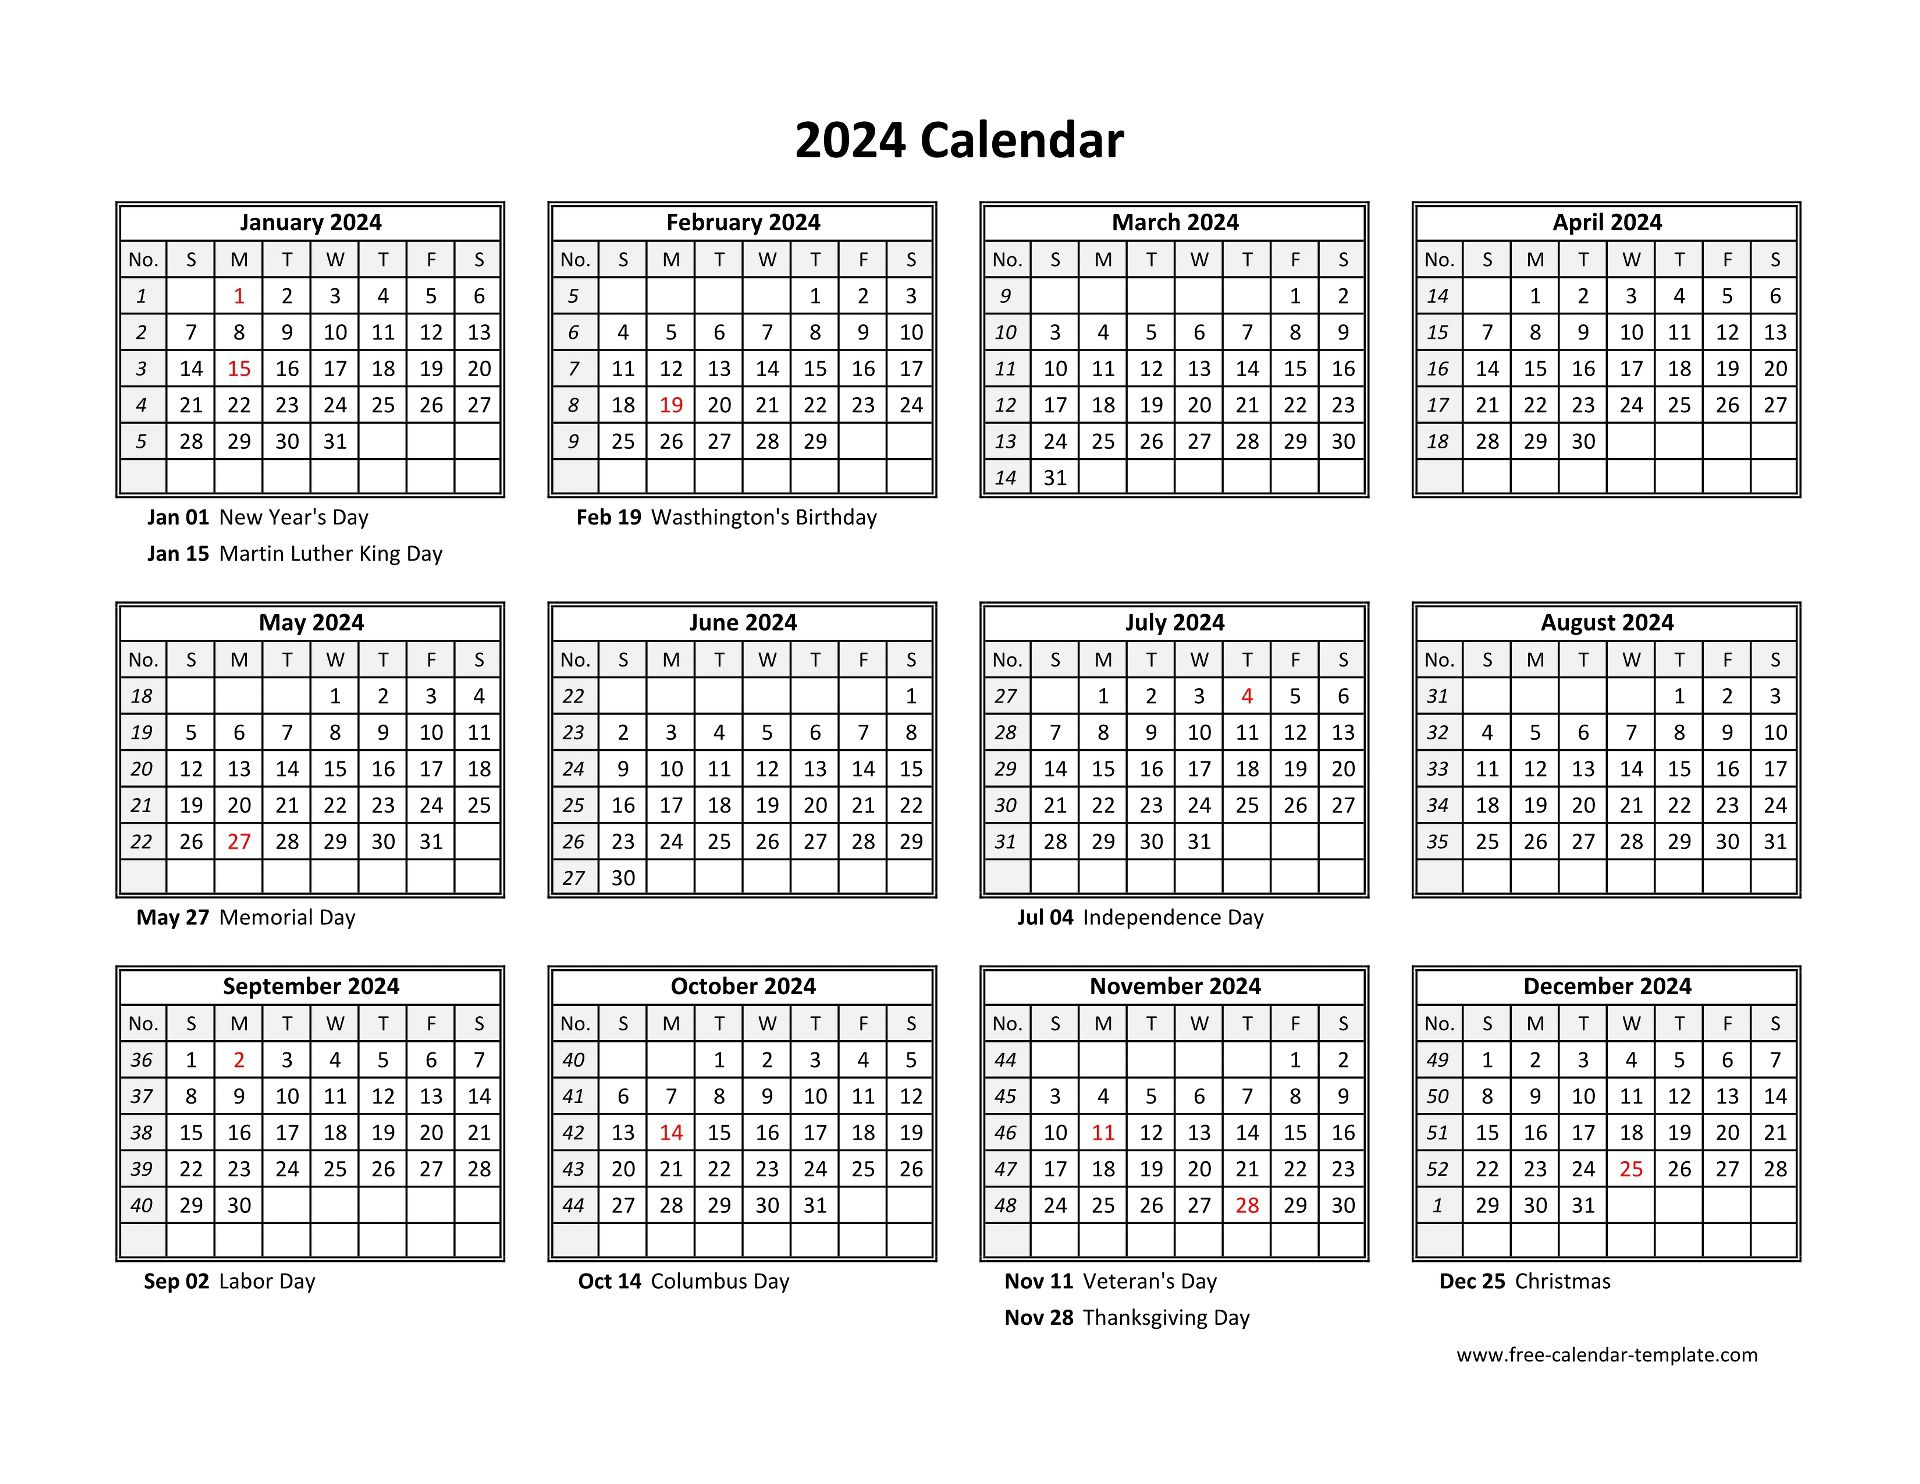 Yearly Calendar 2024 Printable With Federal Holidays | Free | 2024 Printable Calendar One Page With Federal Holidays